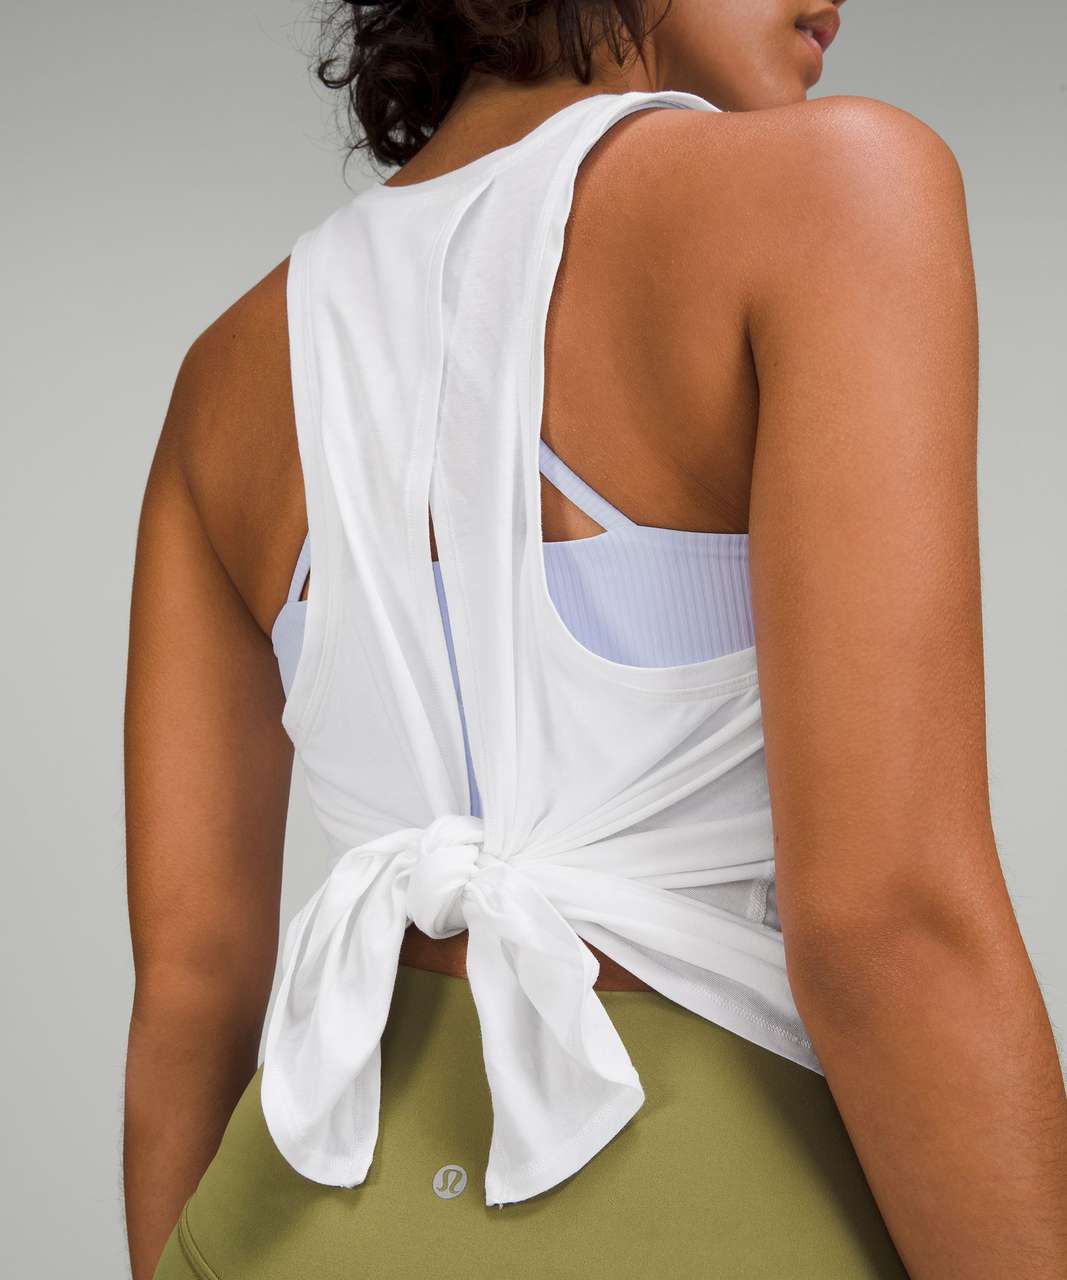 Lululemon All Tied Up Tank Top - White